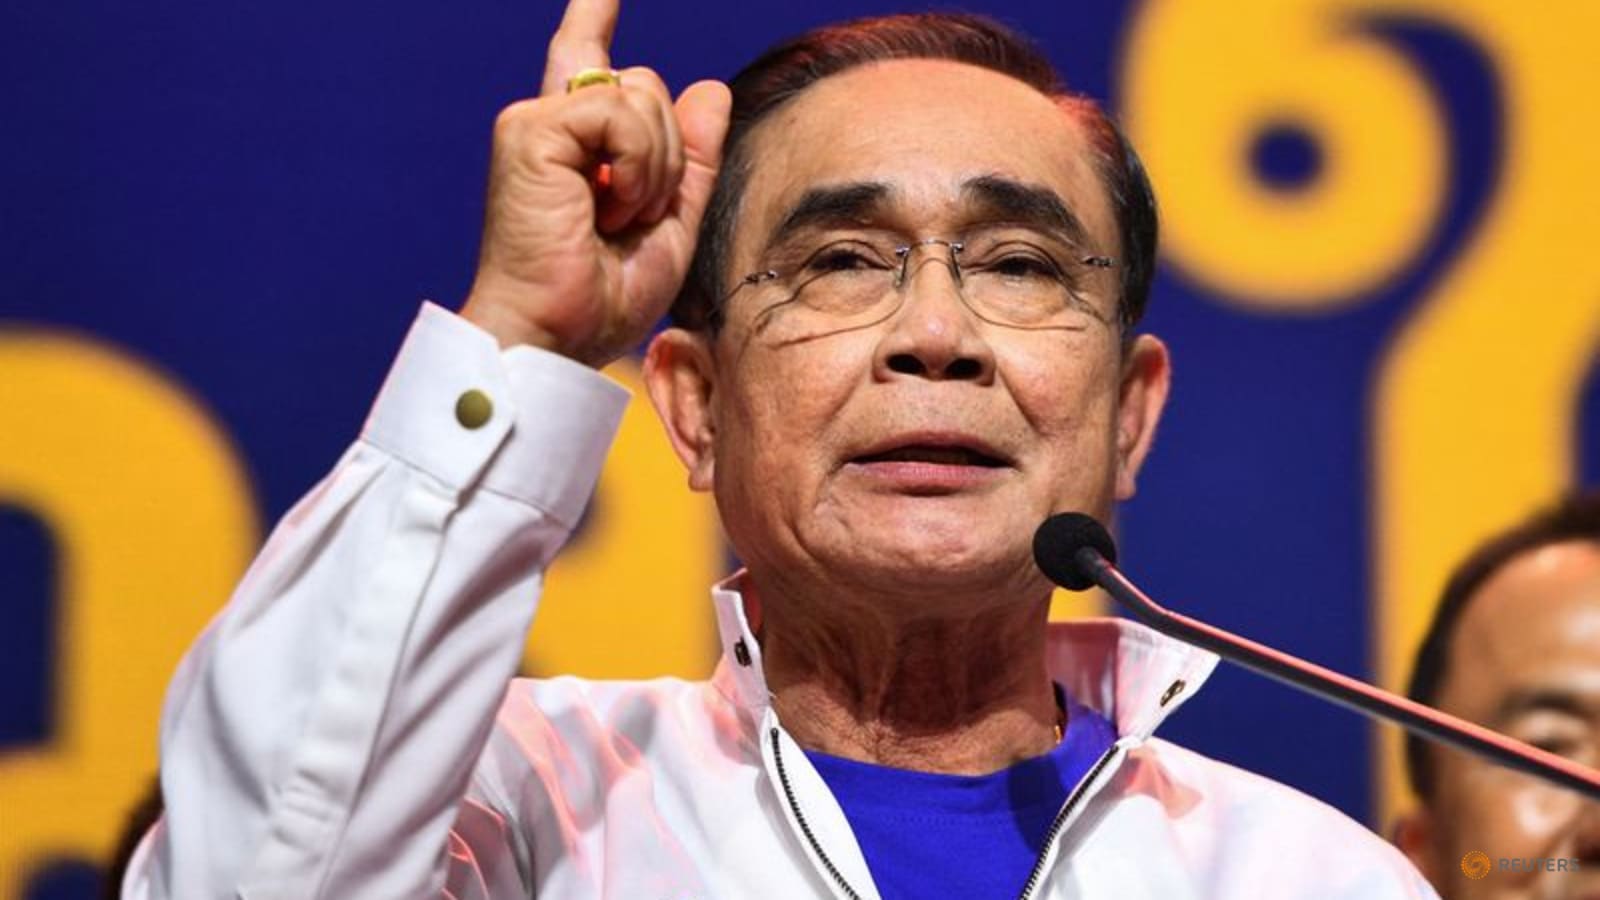 prayut-narrows-gap-in-poll-on-top-choice-for-thailand-pm